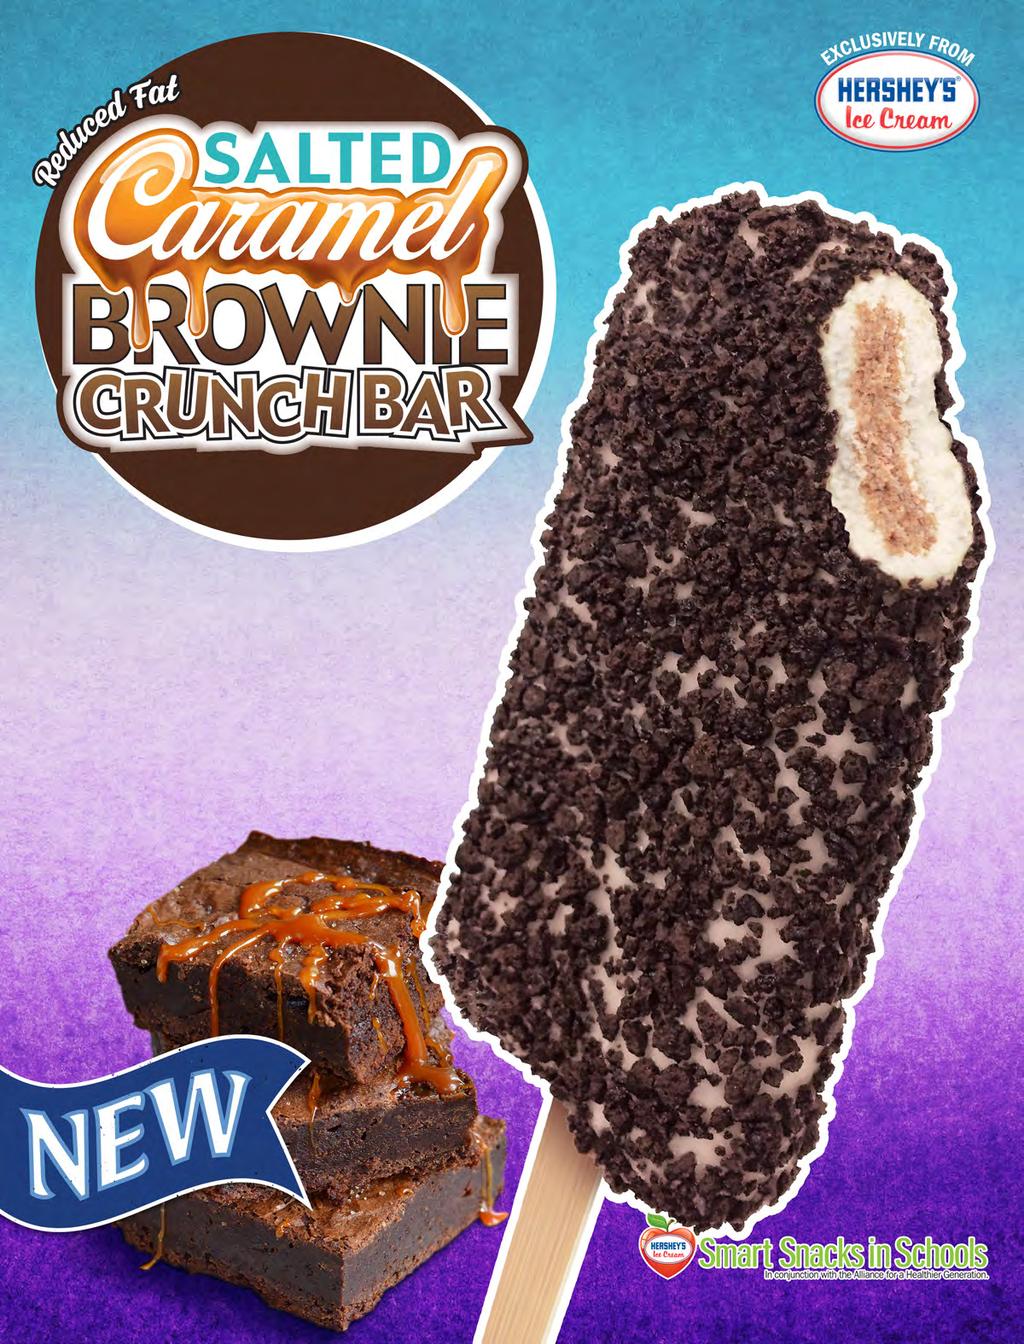 Delicious no fat brownie and salty caramel artificially flavored ice cream coated with chocolate crunch. 36 ct. Case 2.